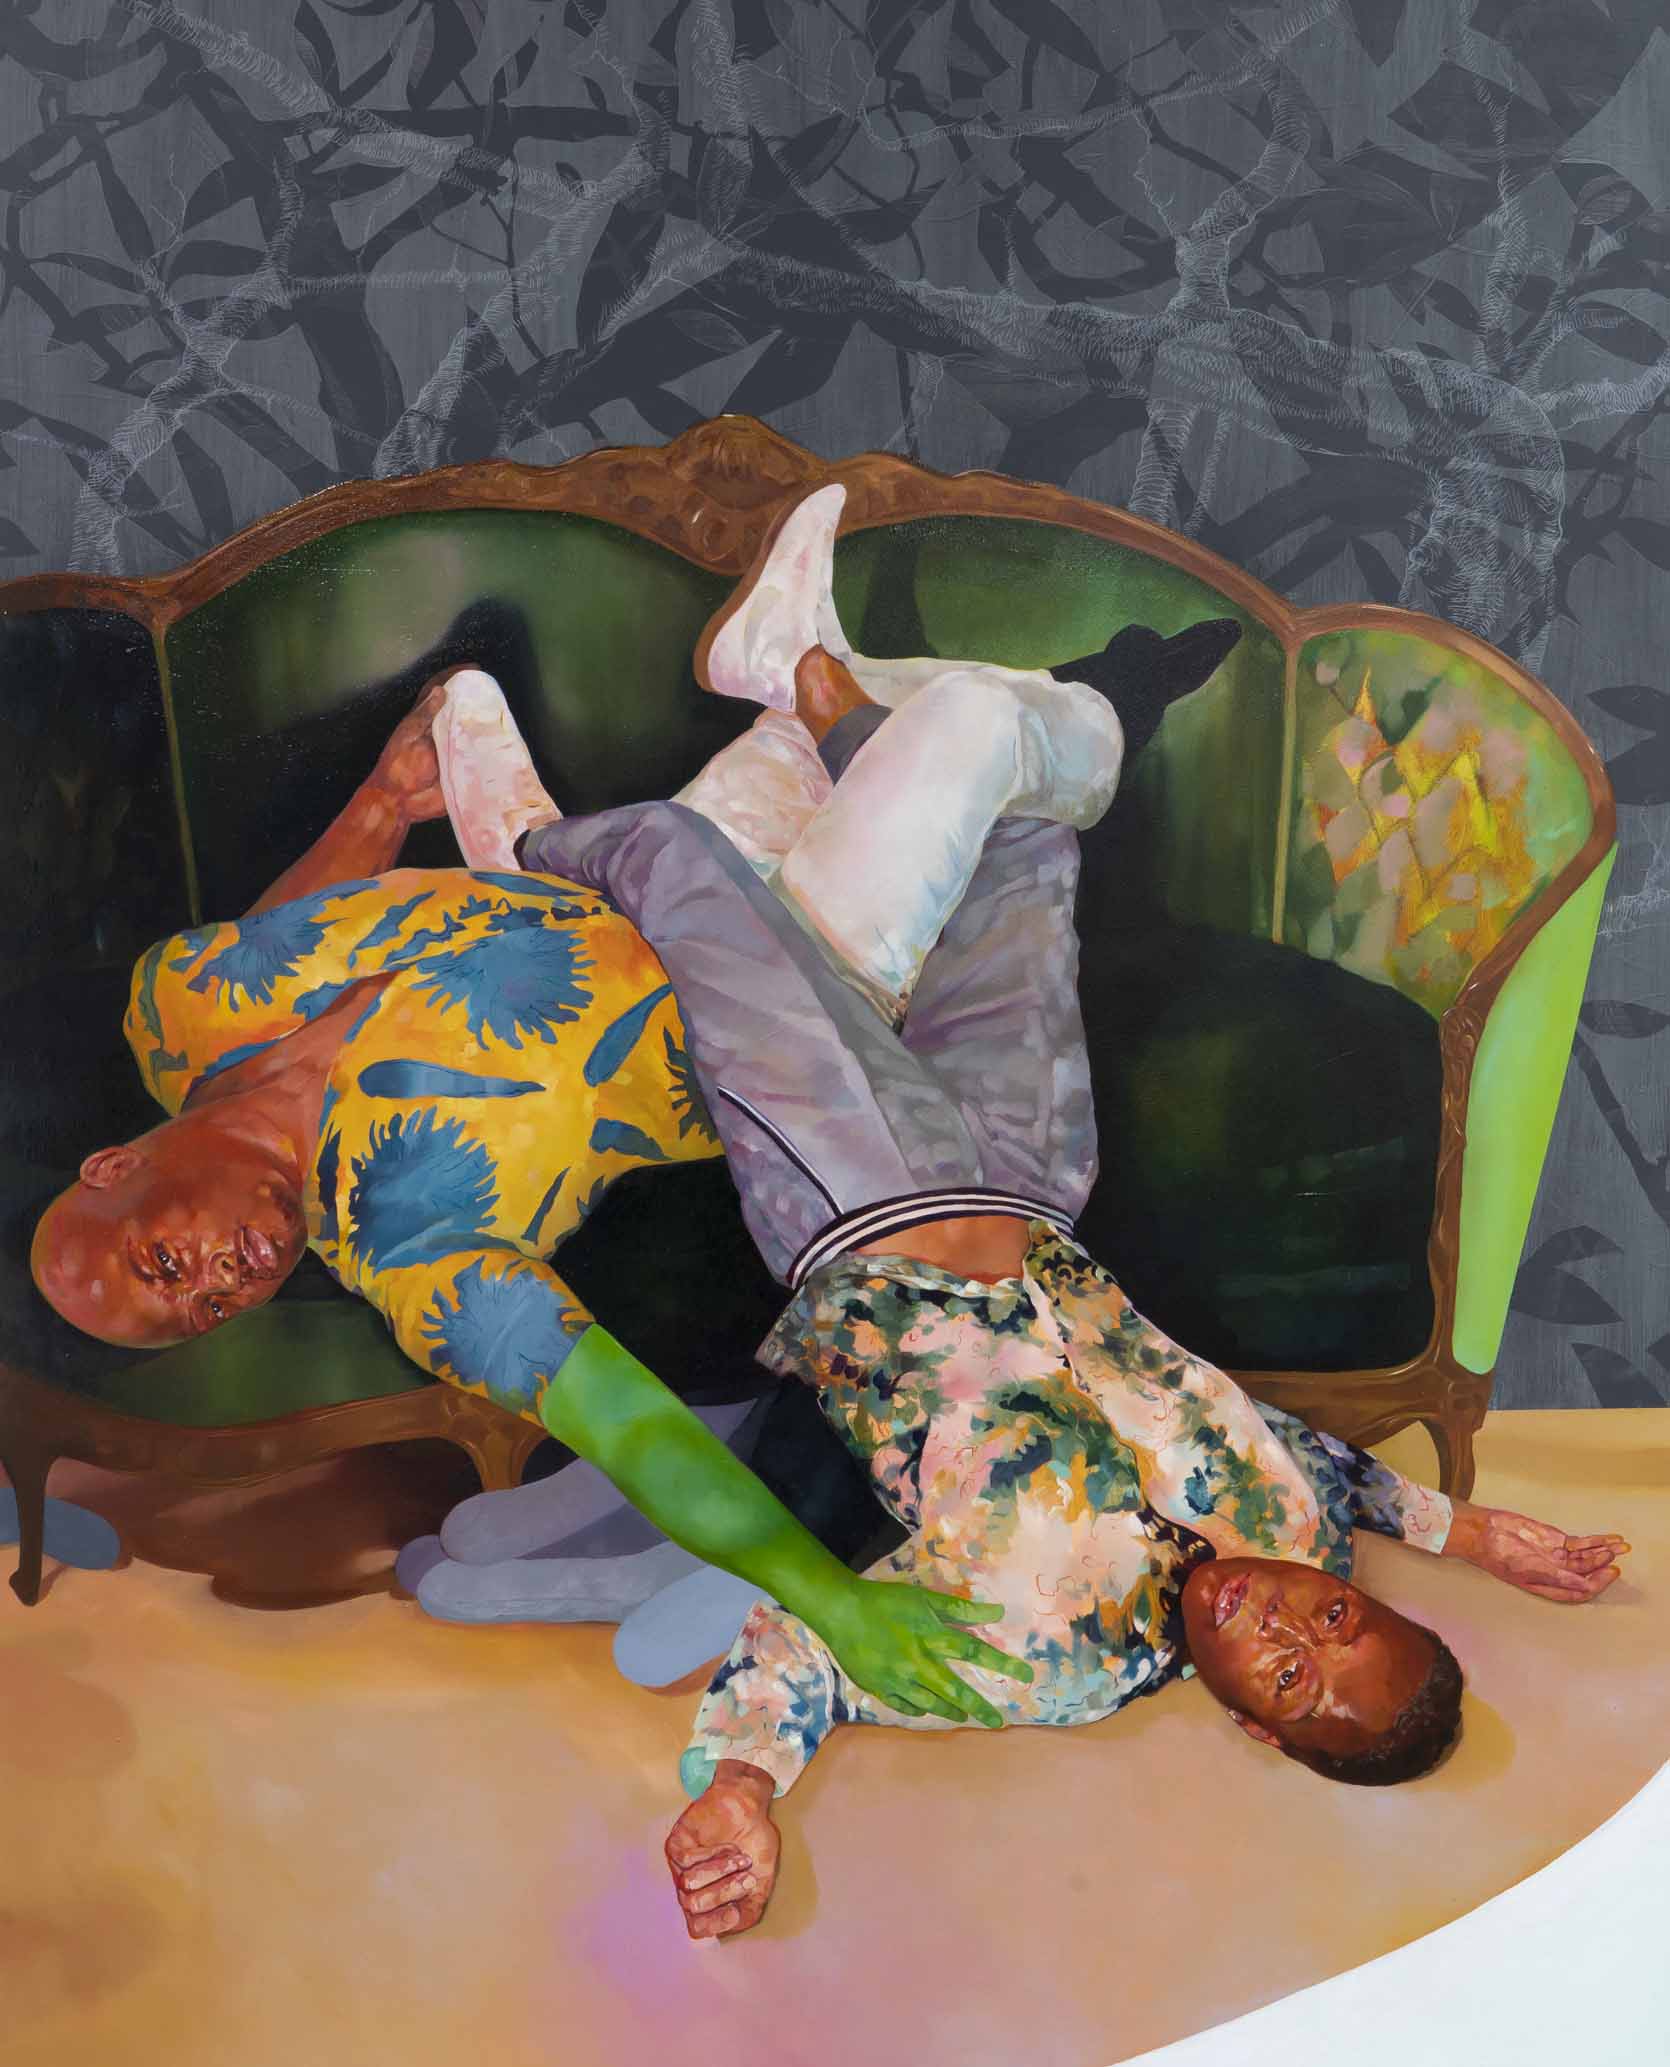 colorful image of man midway between falling out of seat and floor